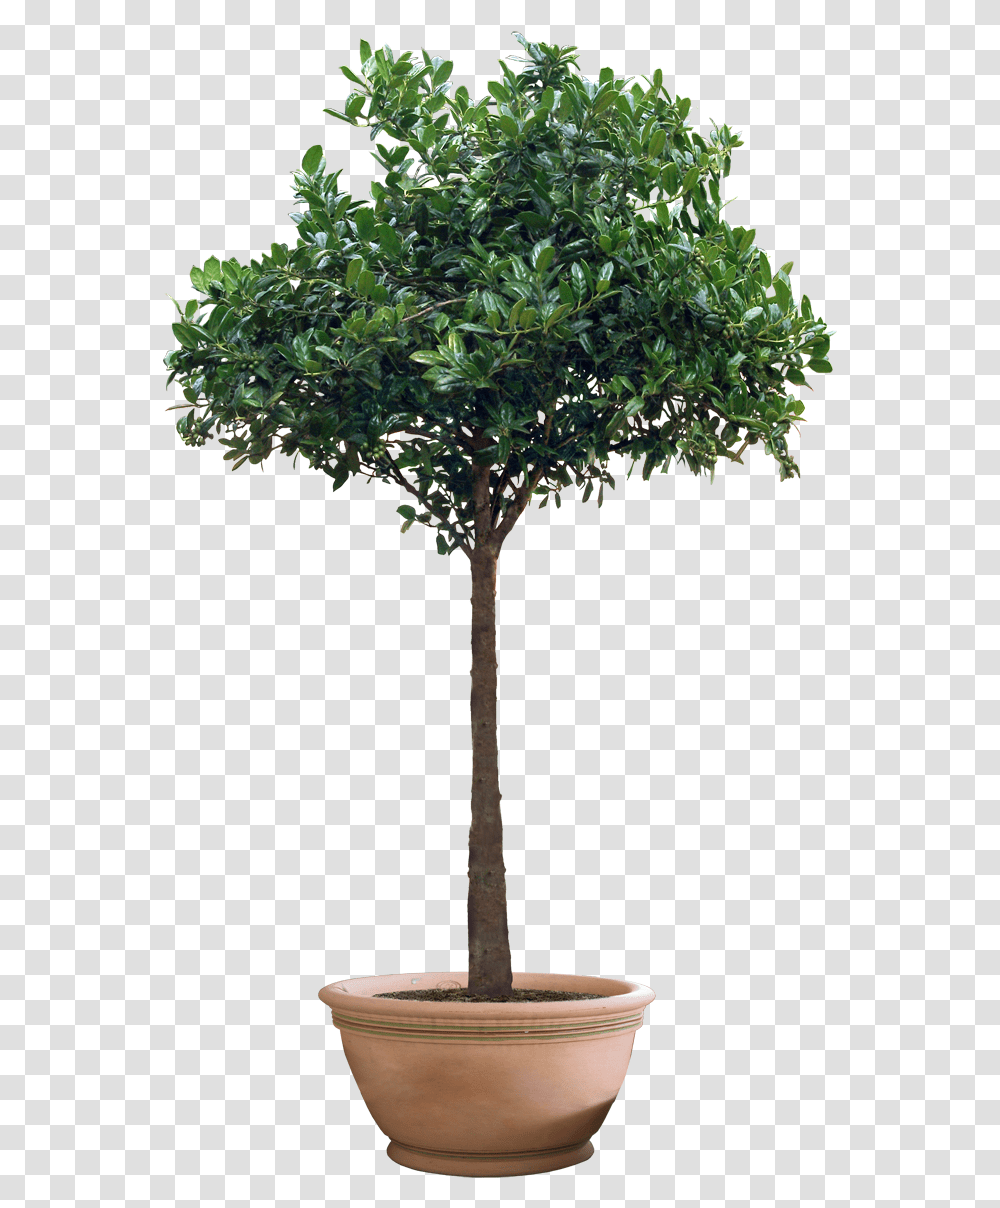 Images Pngs Plant Plants Potted Tree, Palm Tree, Arecaceae, Tree Trunk, Leaf Transparent Png